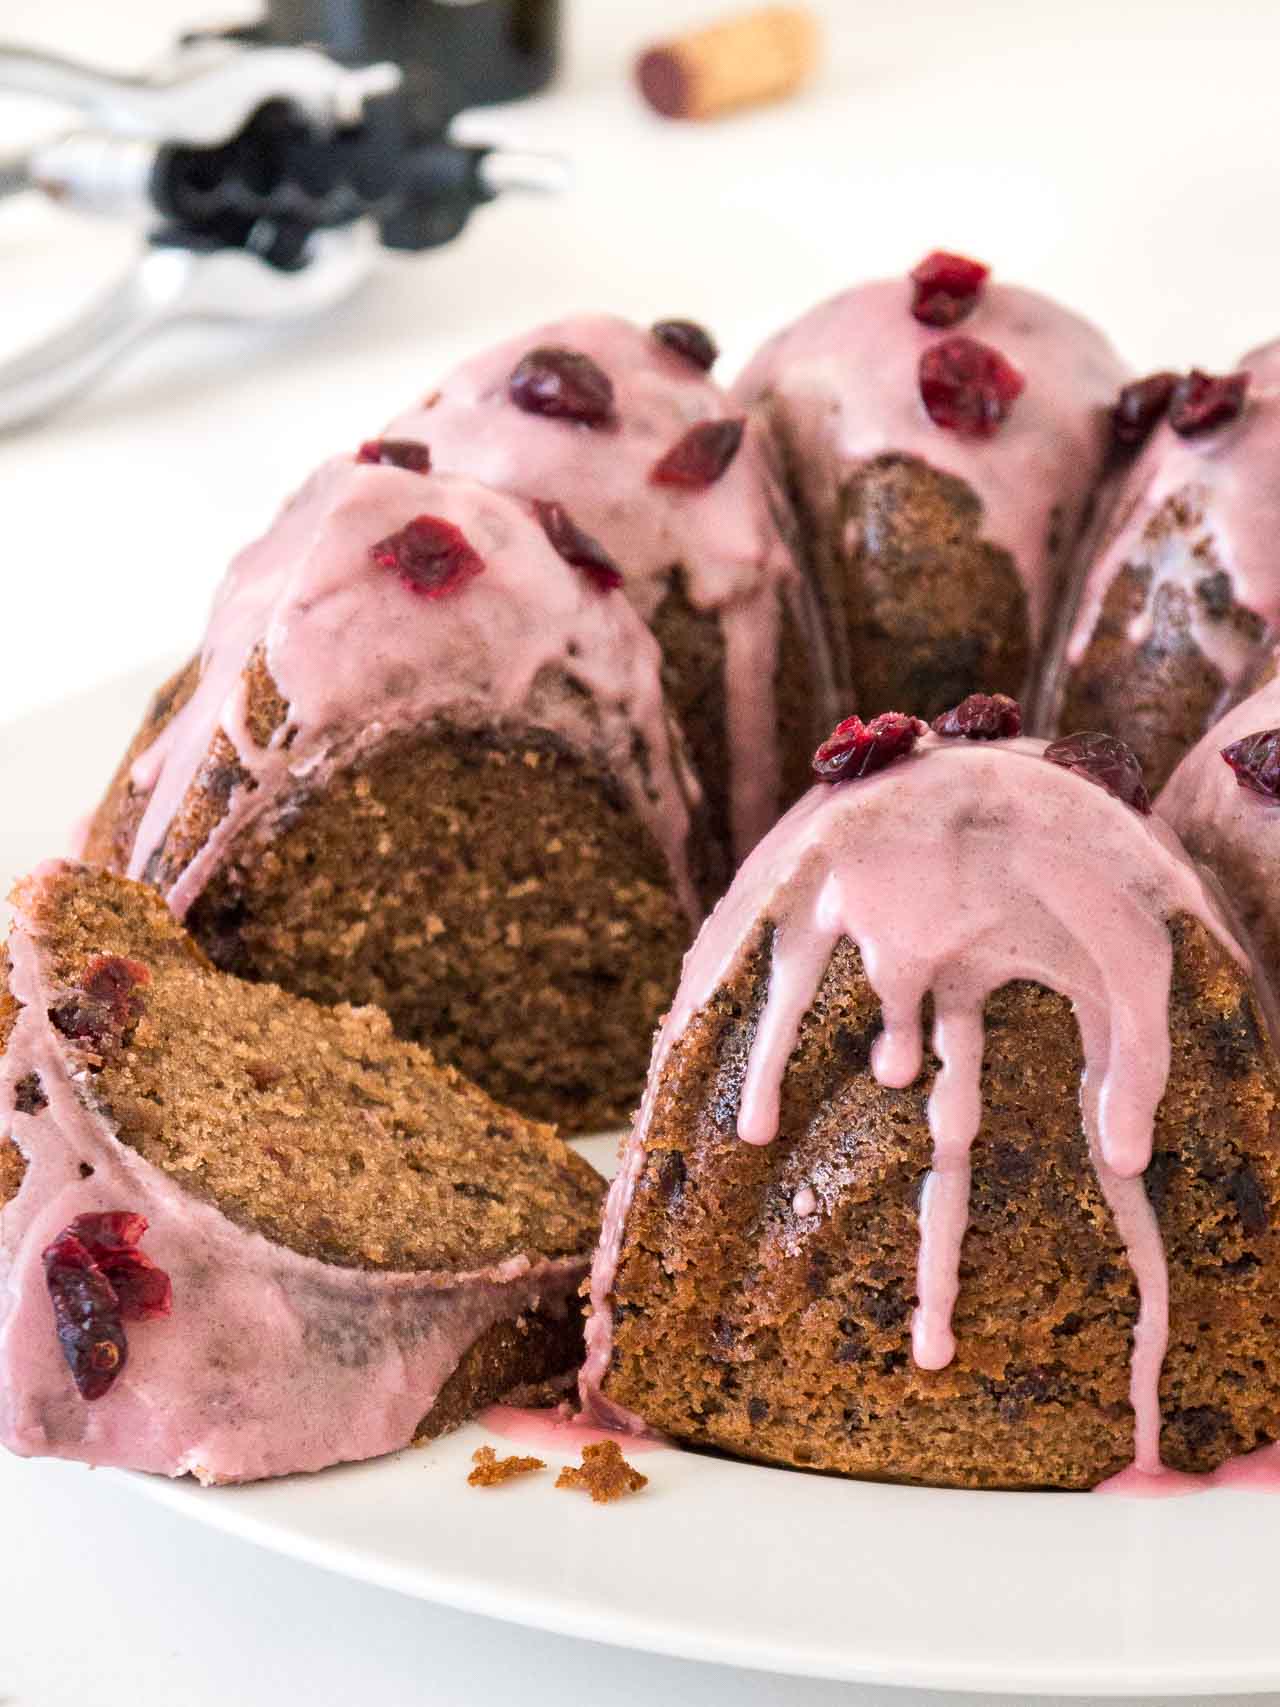 A chocolate cranberry bundt cake with pink frosting, garnished with dried cranberries on a white plate. A piece of the cake has been cut out and is lying in front.